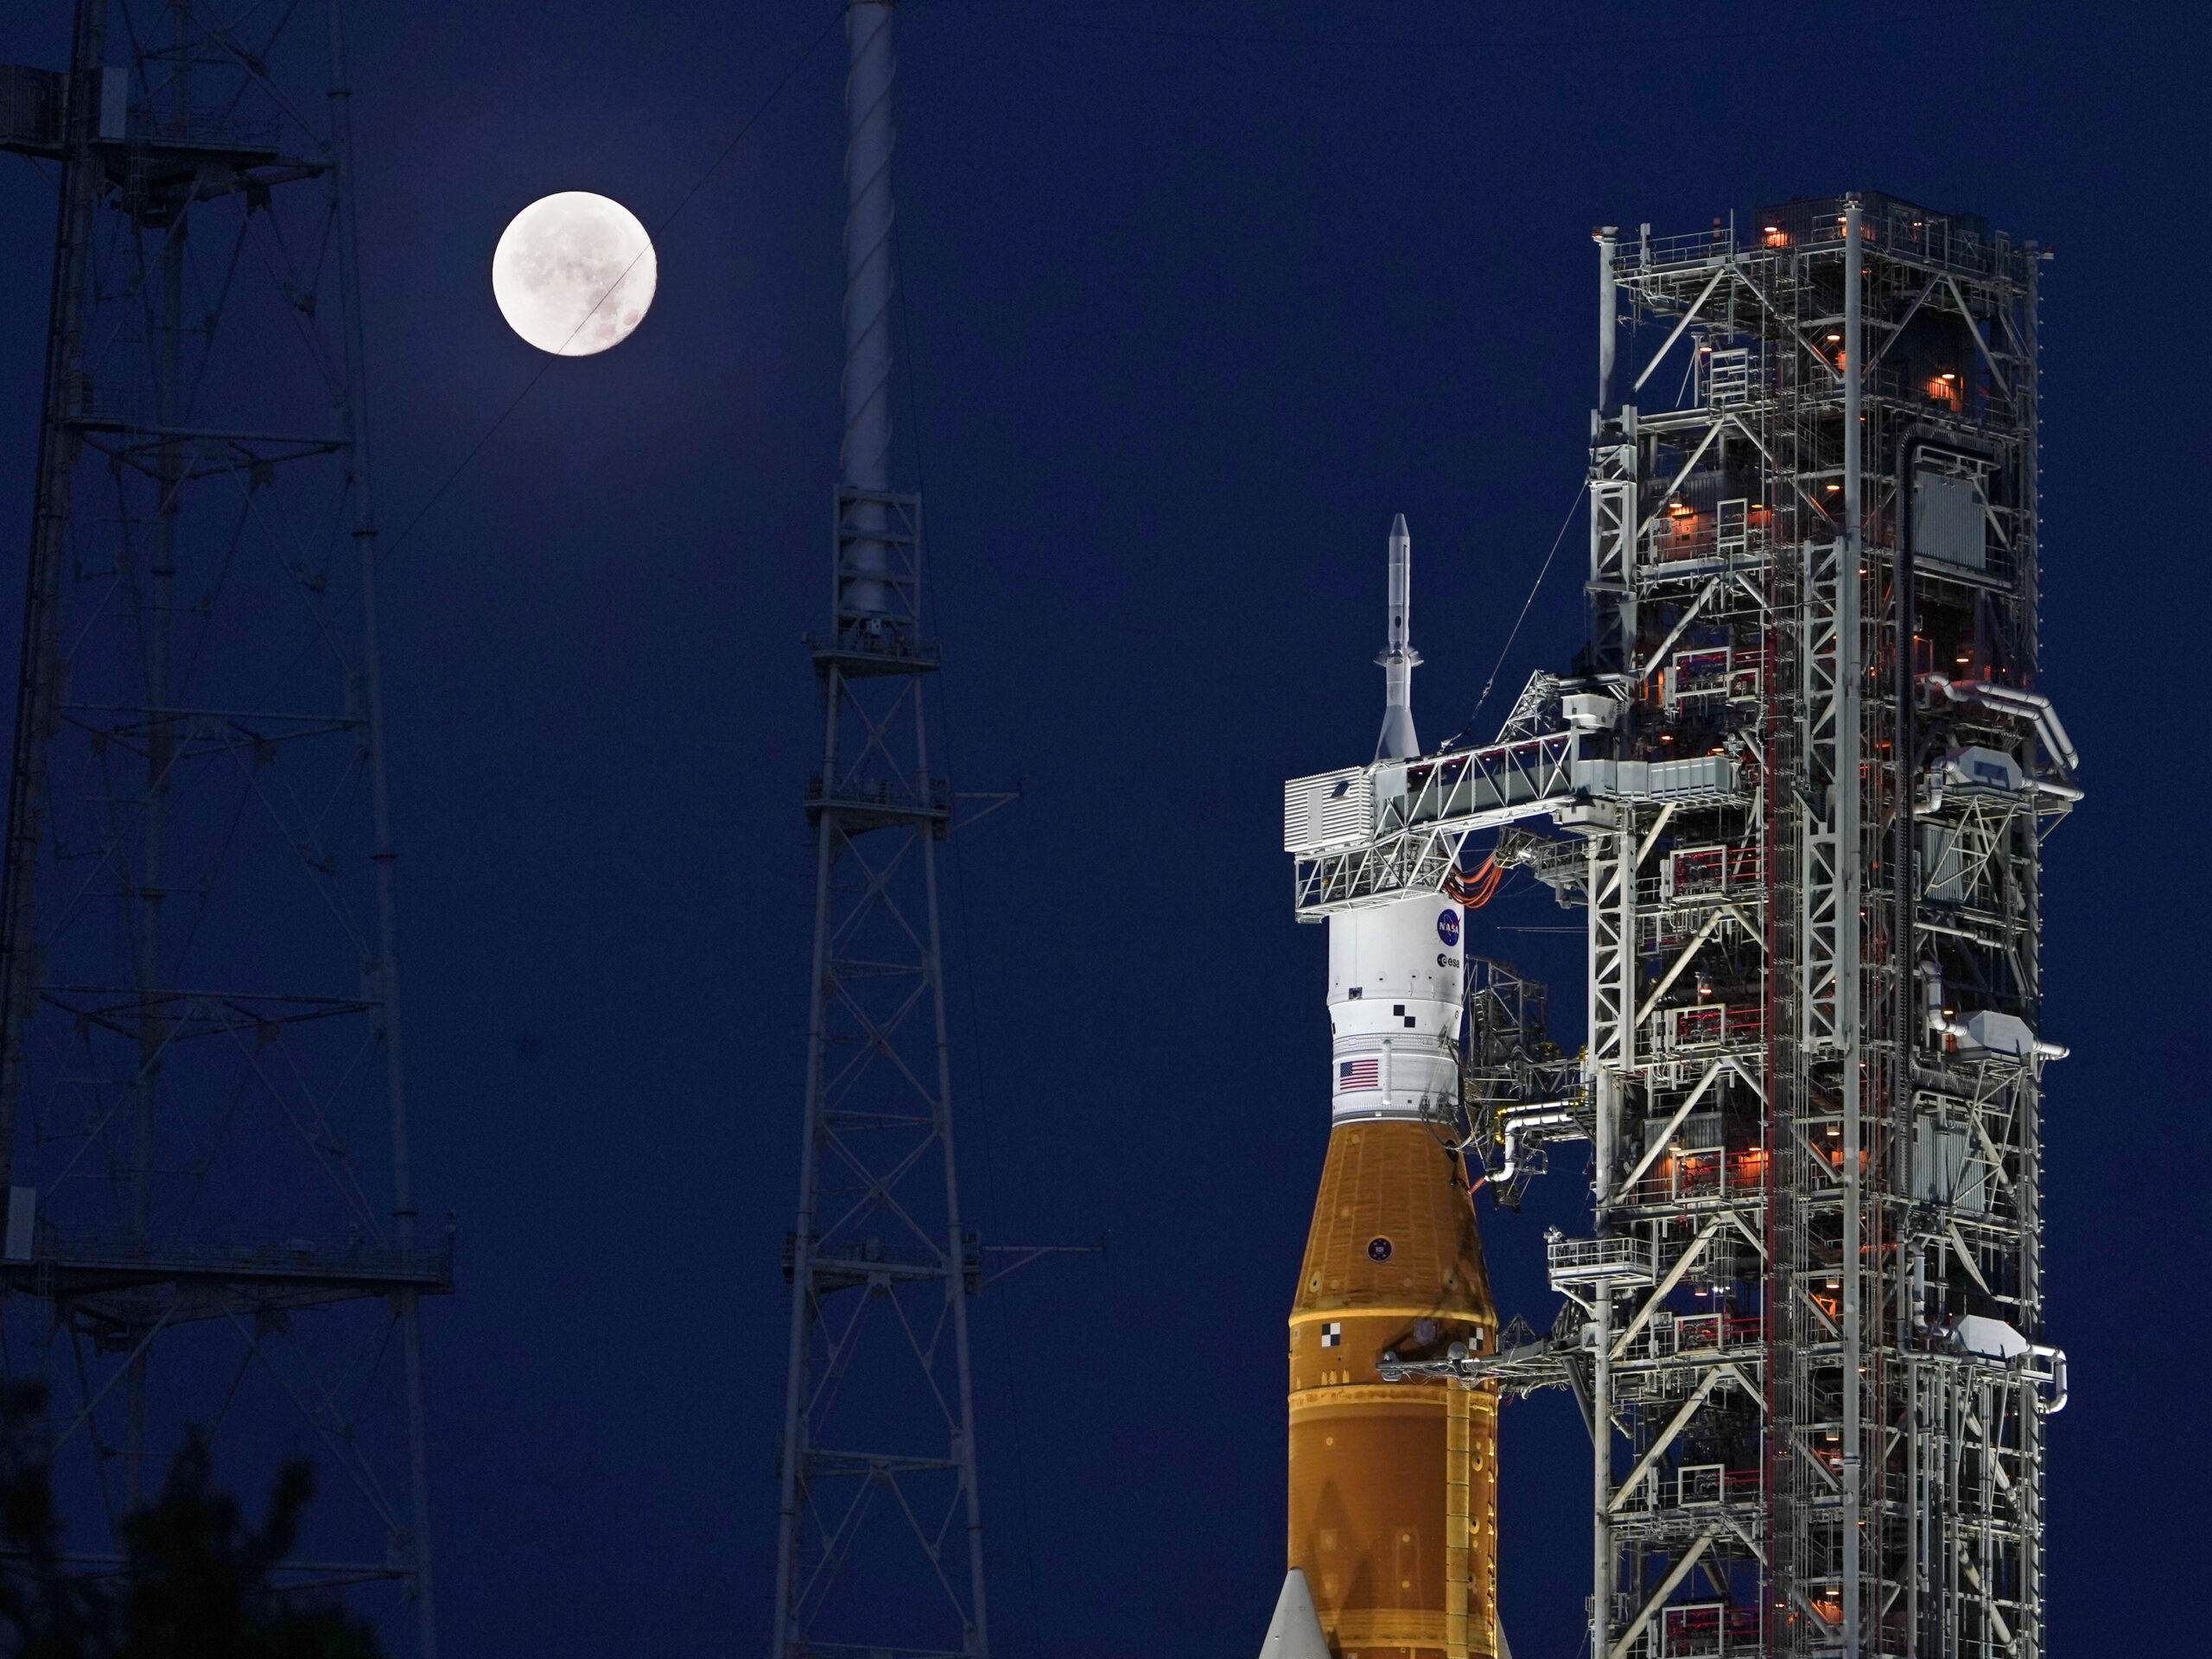 NASA has been asked to create a time zone for the moon. Here’s how it would work